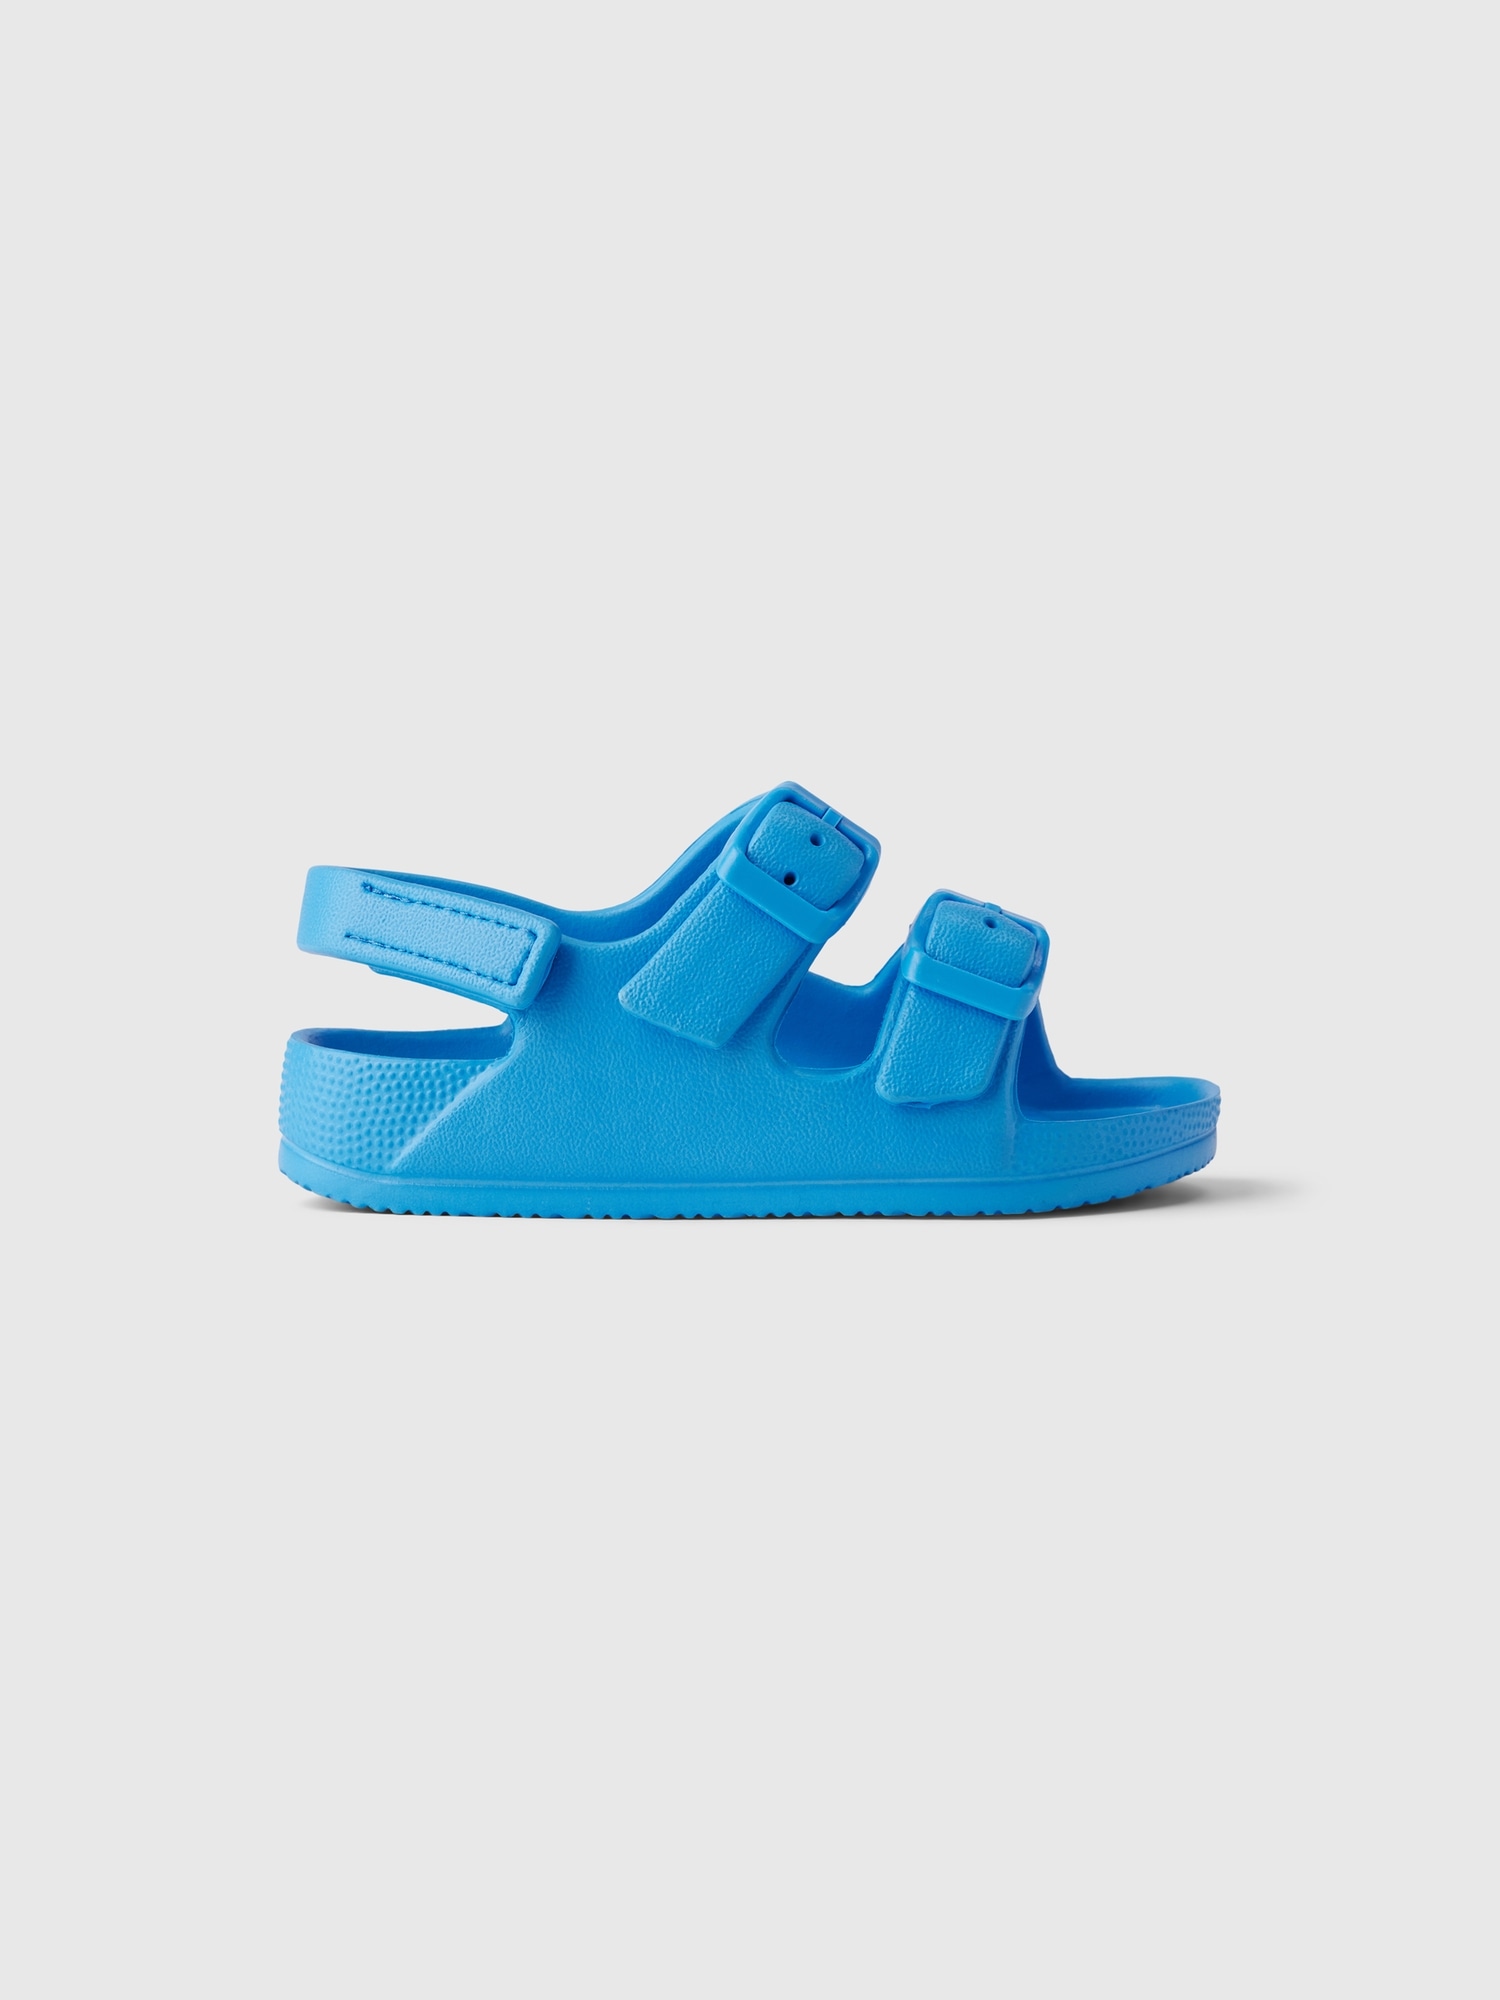 Gap Babies' Toddler Double Buckle Sandals In Union Blue